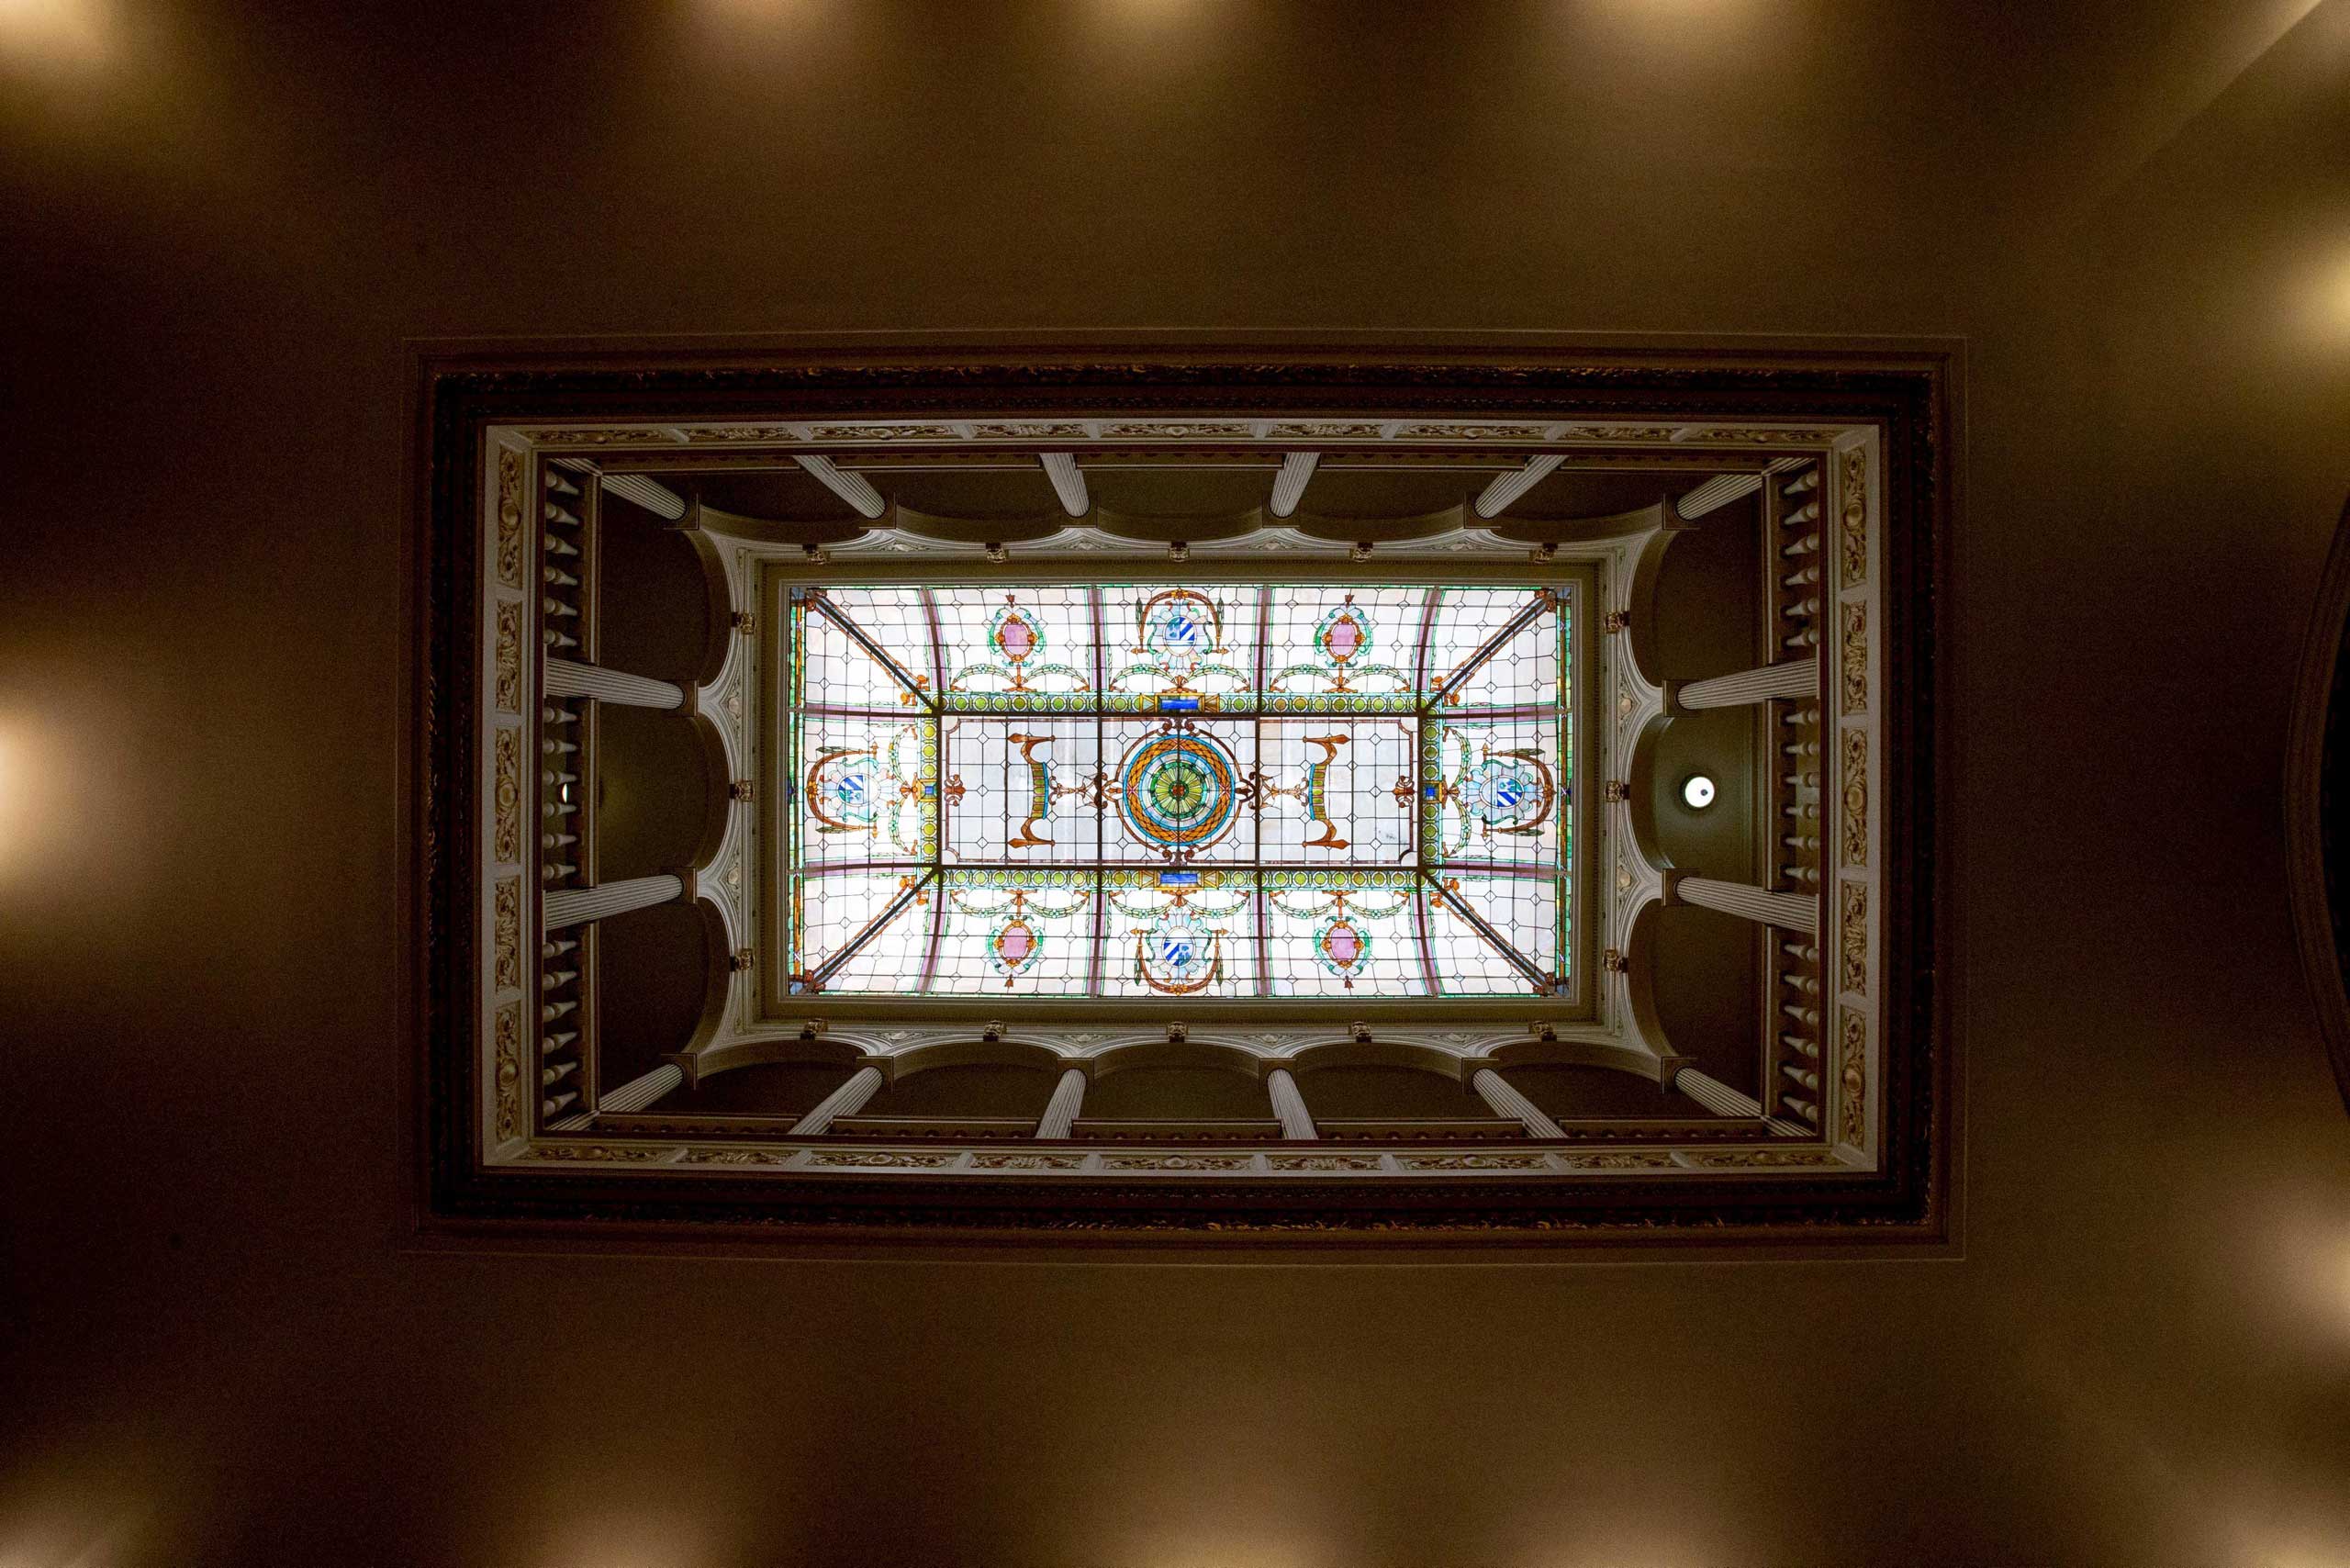 View of the skylight over the main room of the new Cuban embassy in Washington on July 20, 2015.